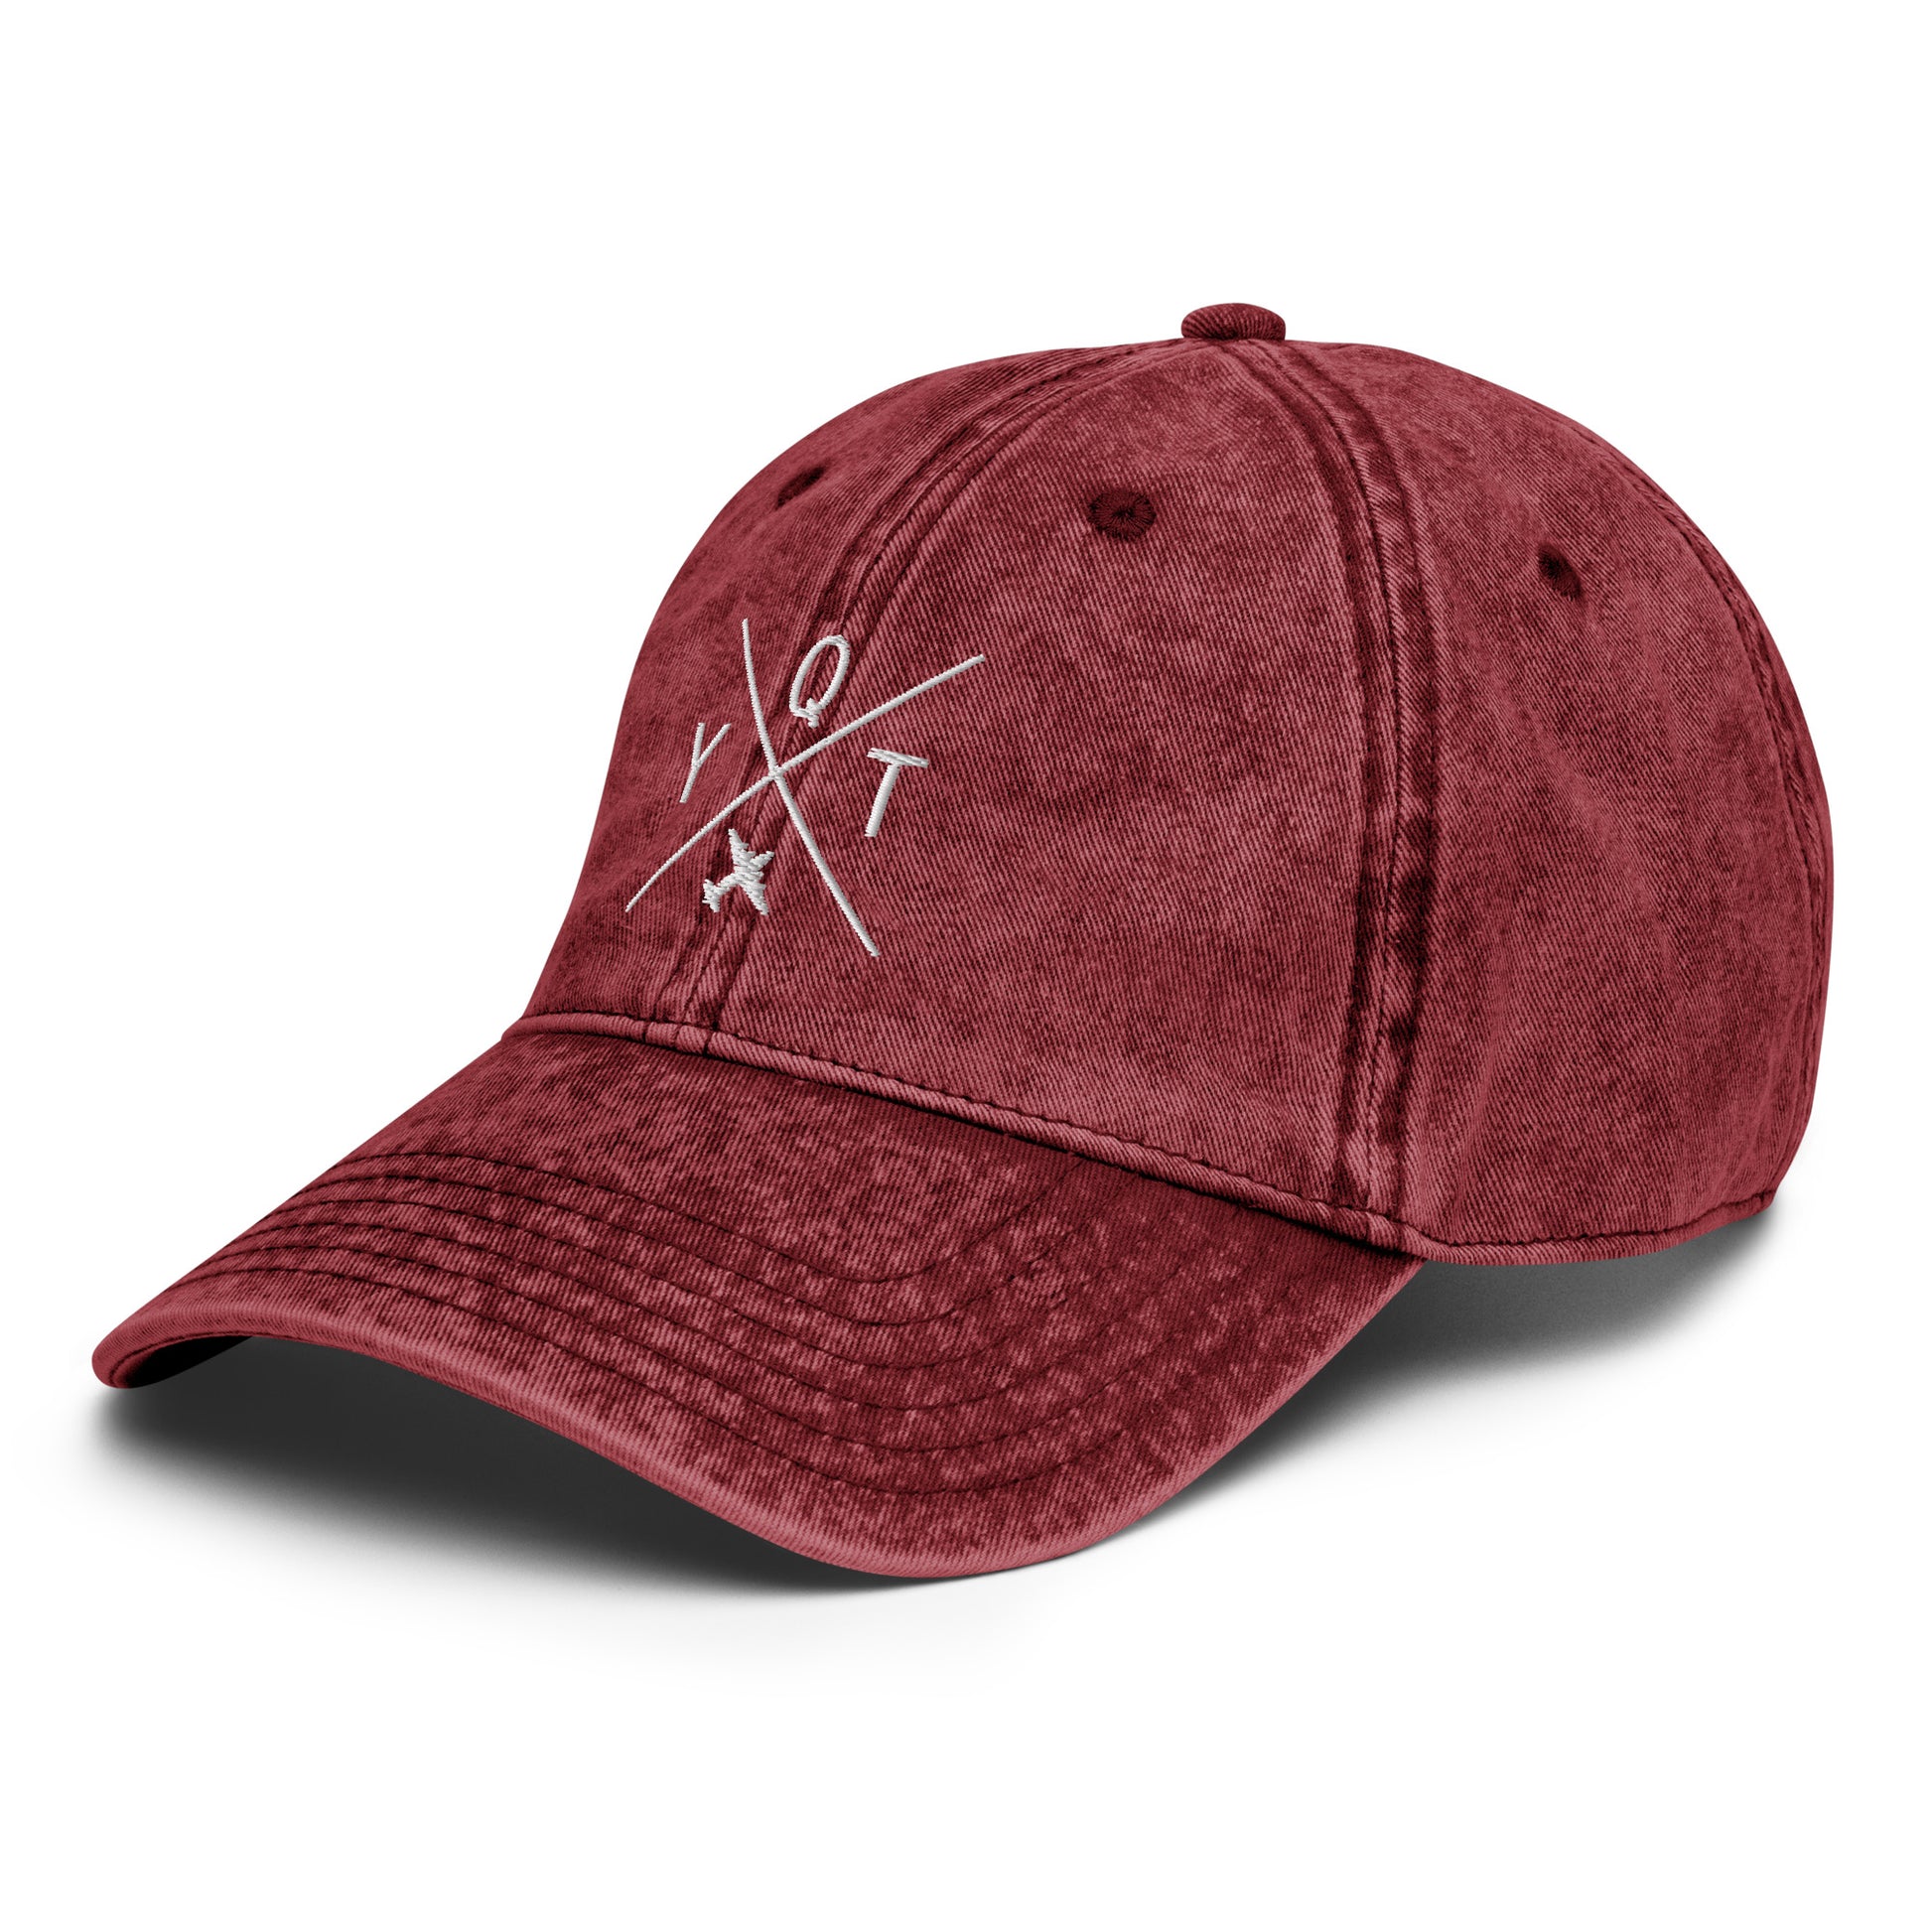 Crossed-X Cotton Twill Cap - White • YQT Thunder Bay • YHM Designs - Image 23